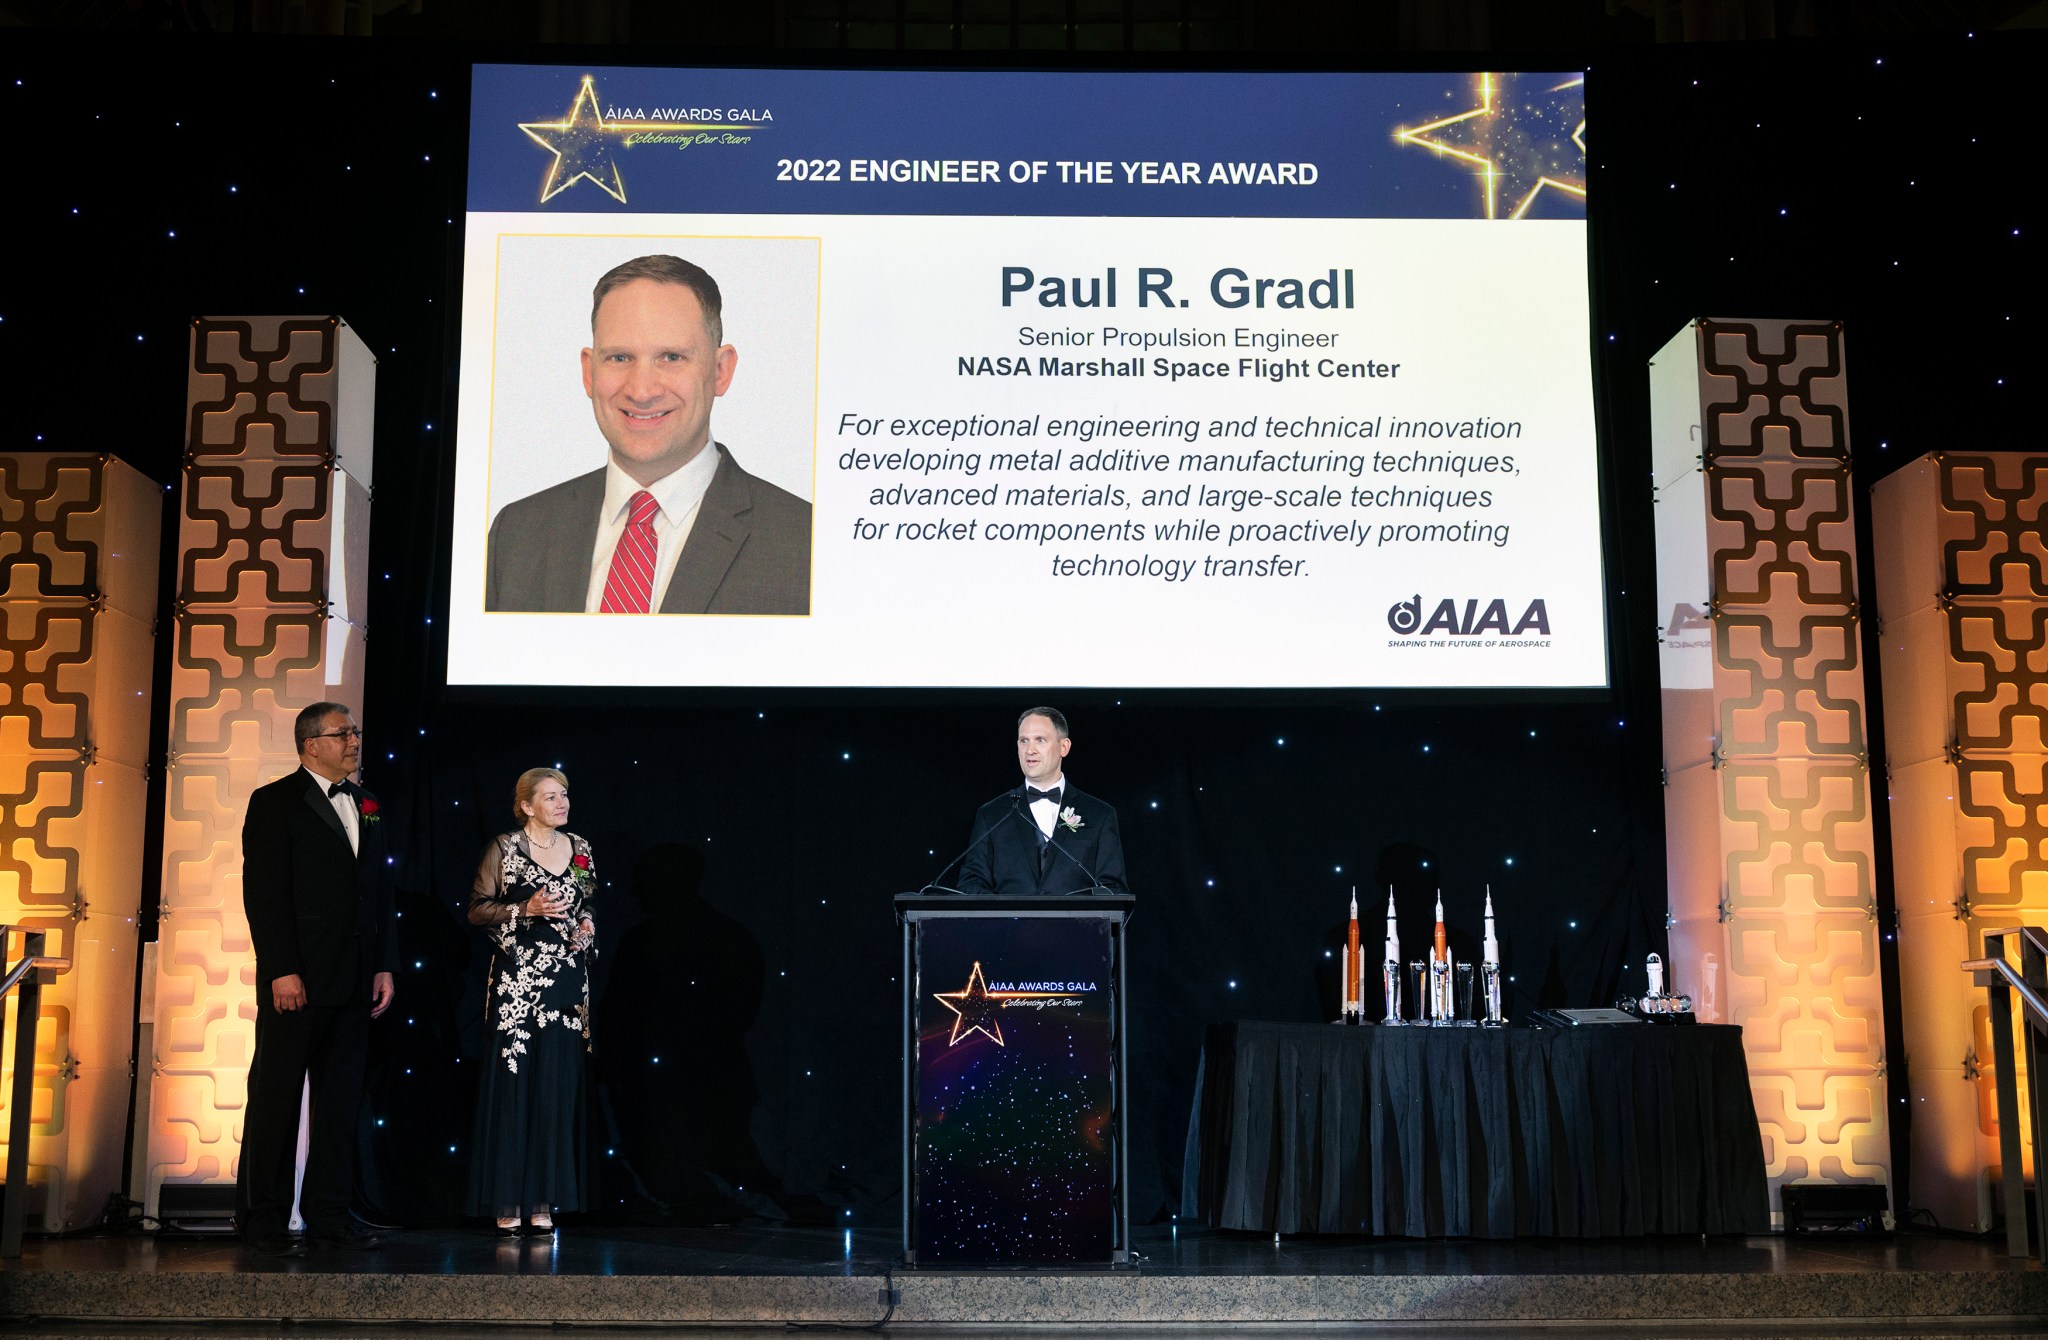 Paul Gradl delivers his acceptance speech as the recipient of the Engineer of the Year Award at the AIAA Awards Gala.